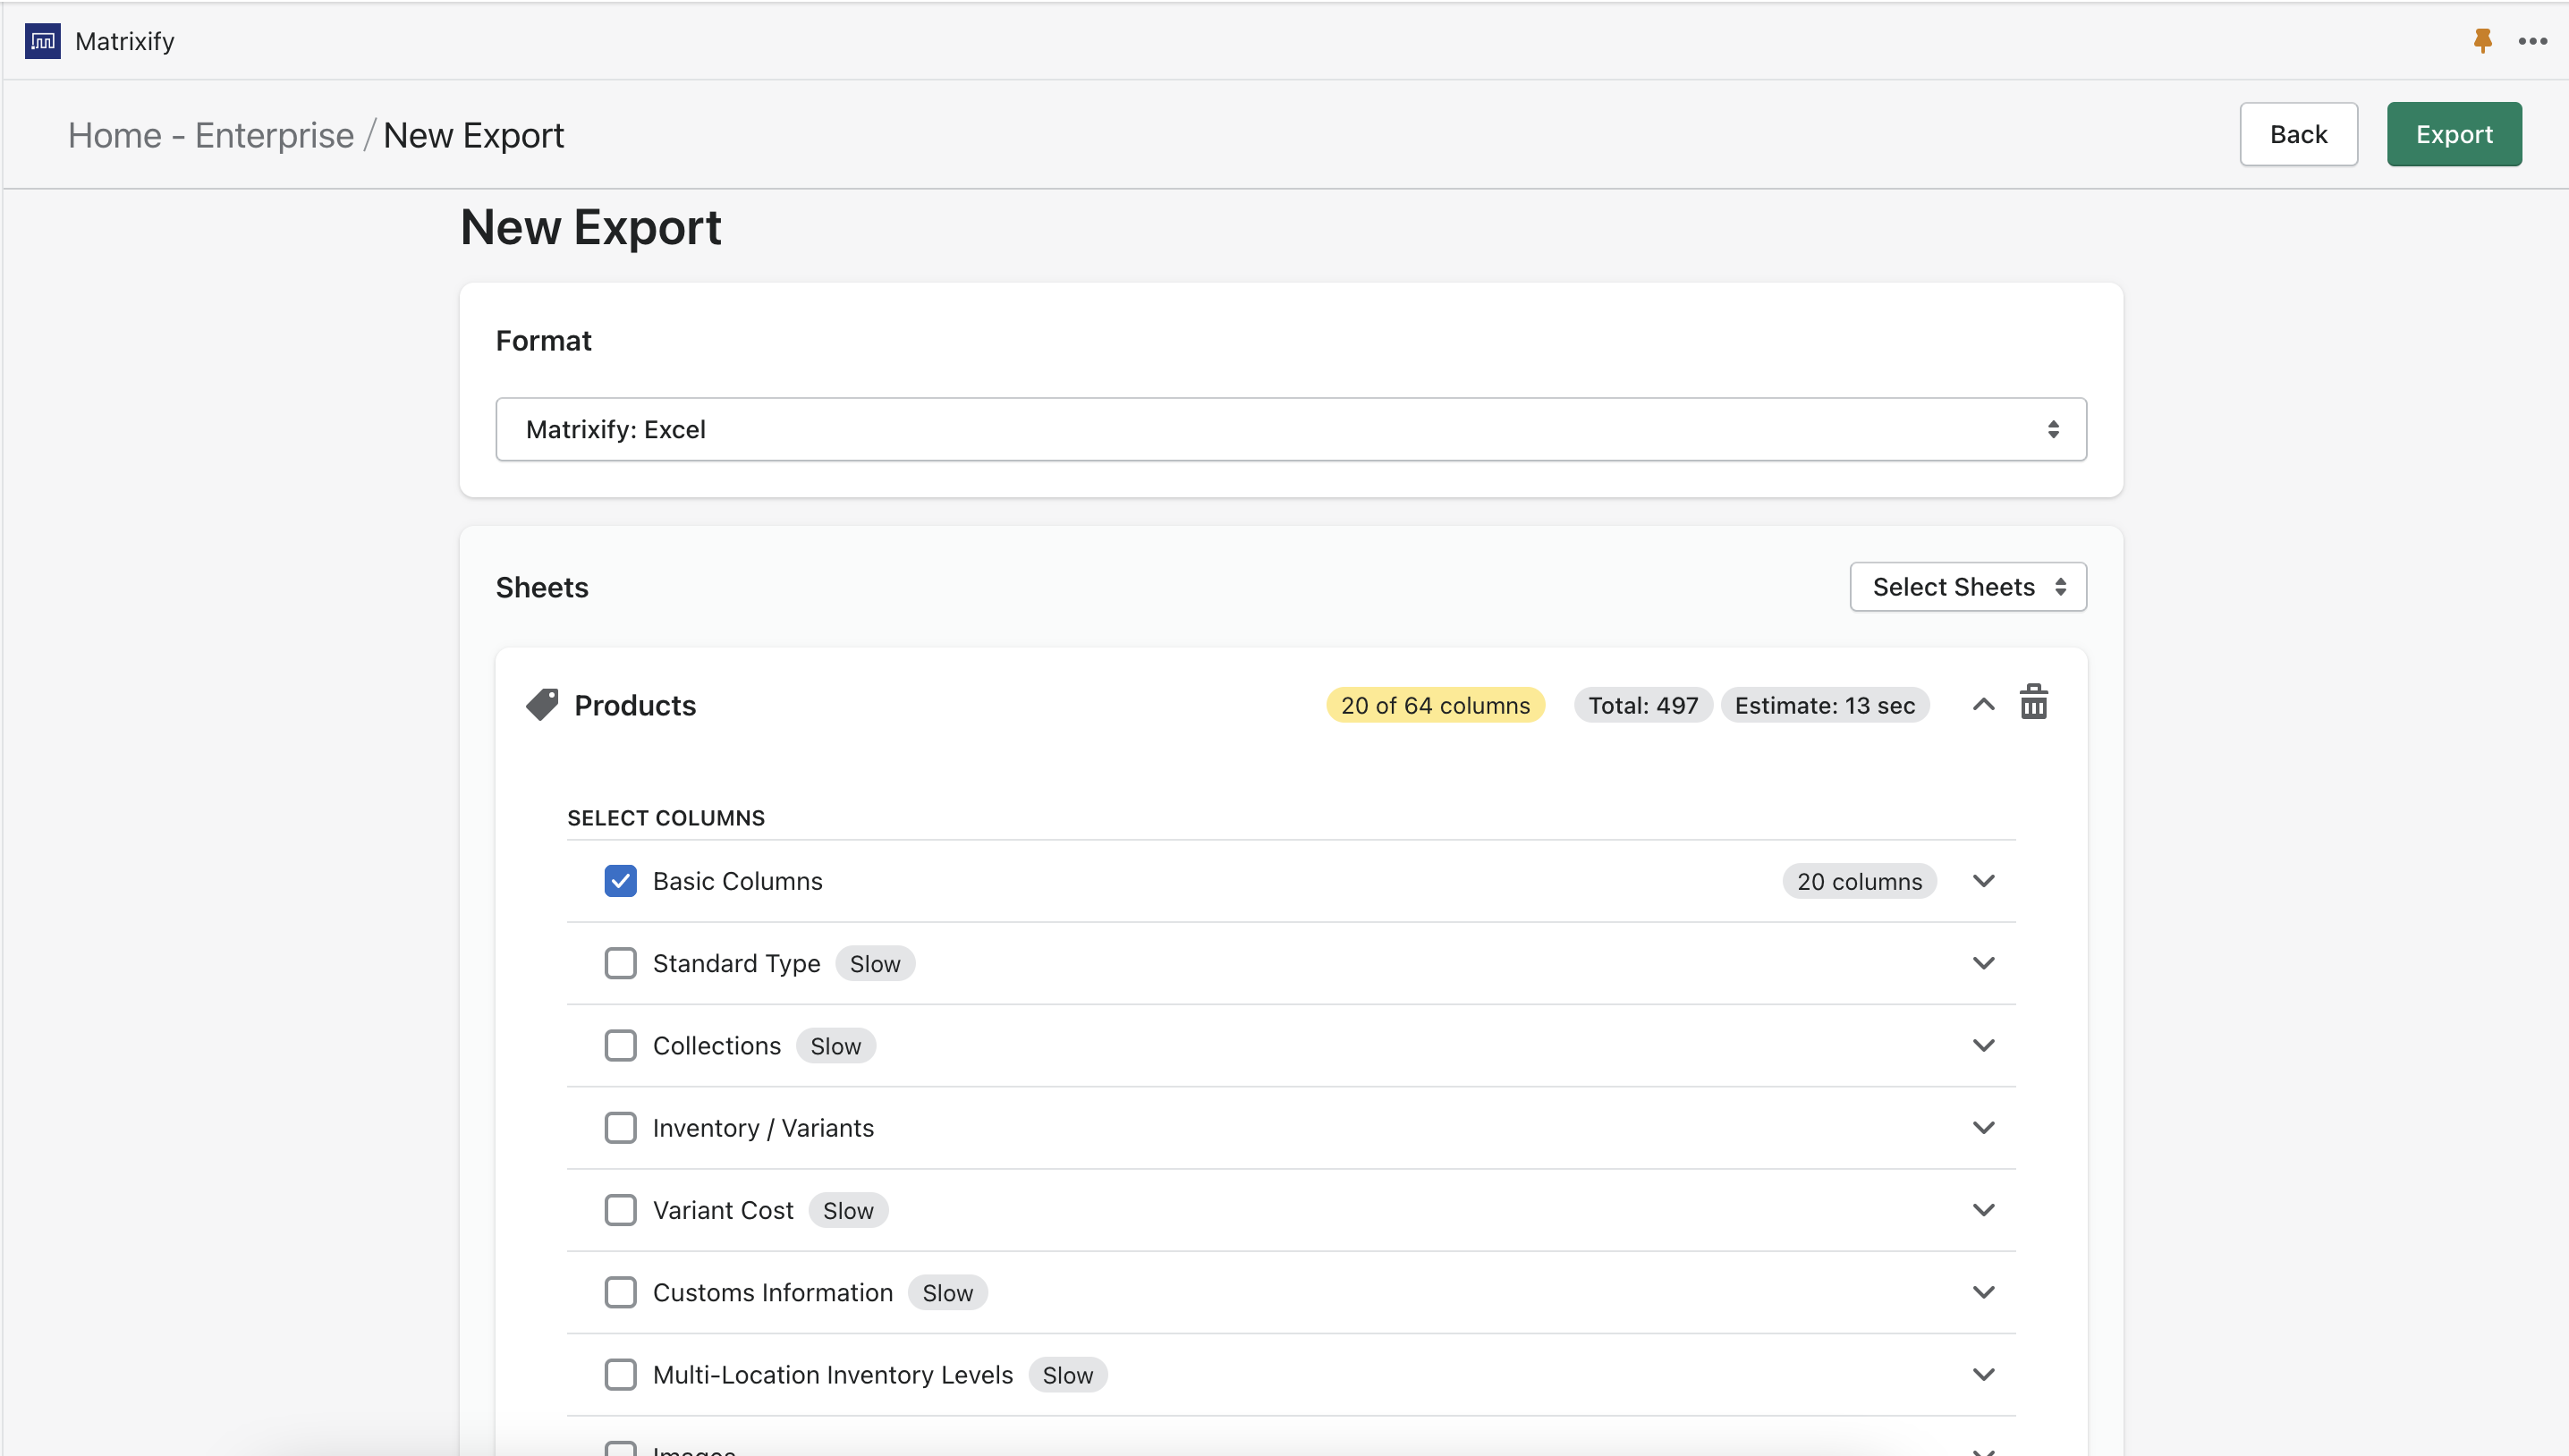 Exporting Products with Basic Columns